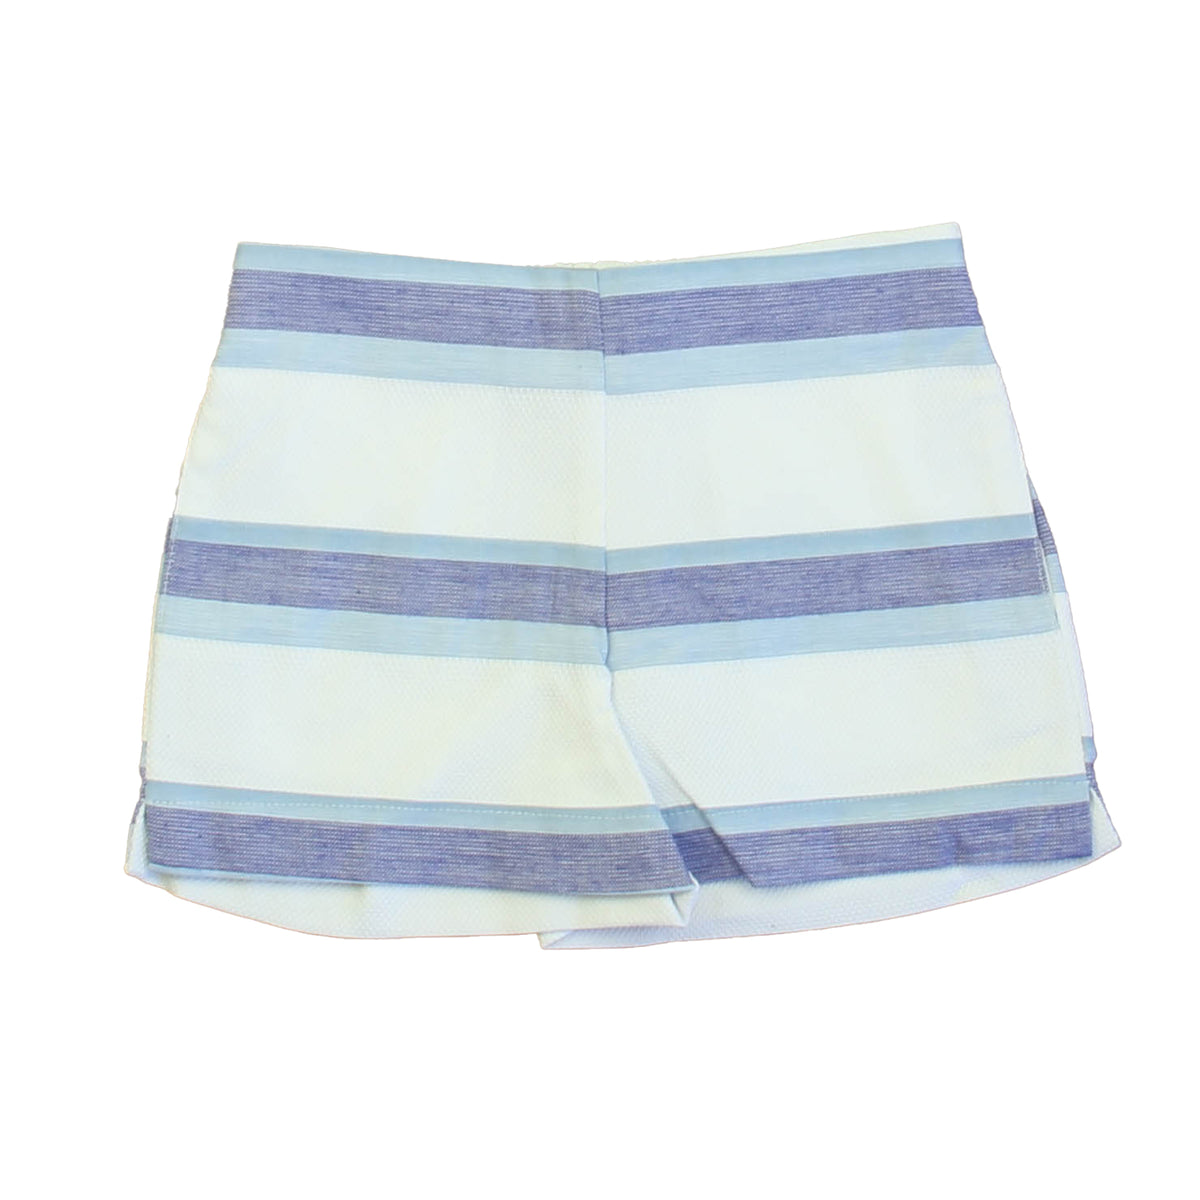 New with Tags: Picnic Stripe Shorts size: 2-5T -- FINAL SALE